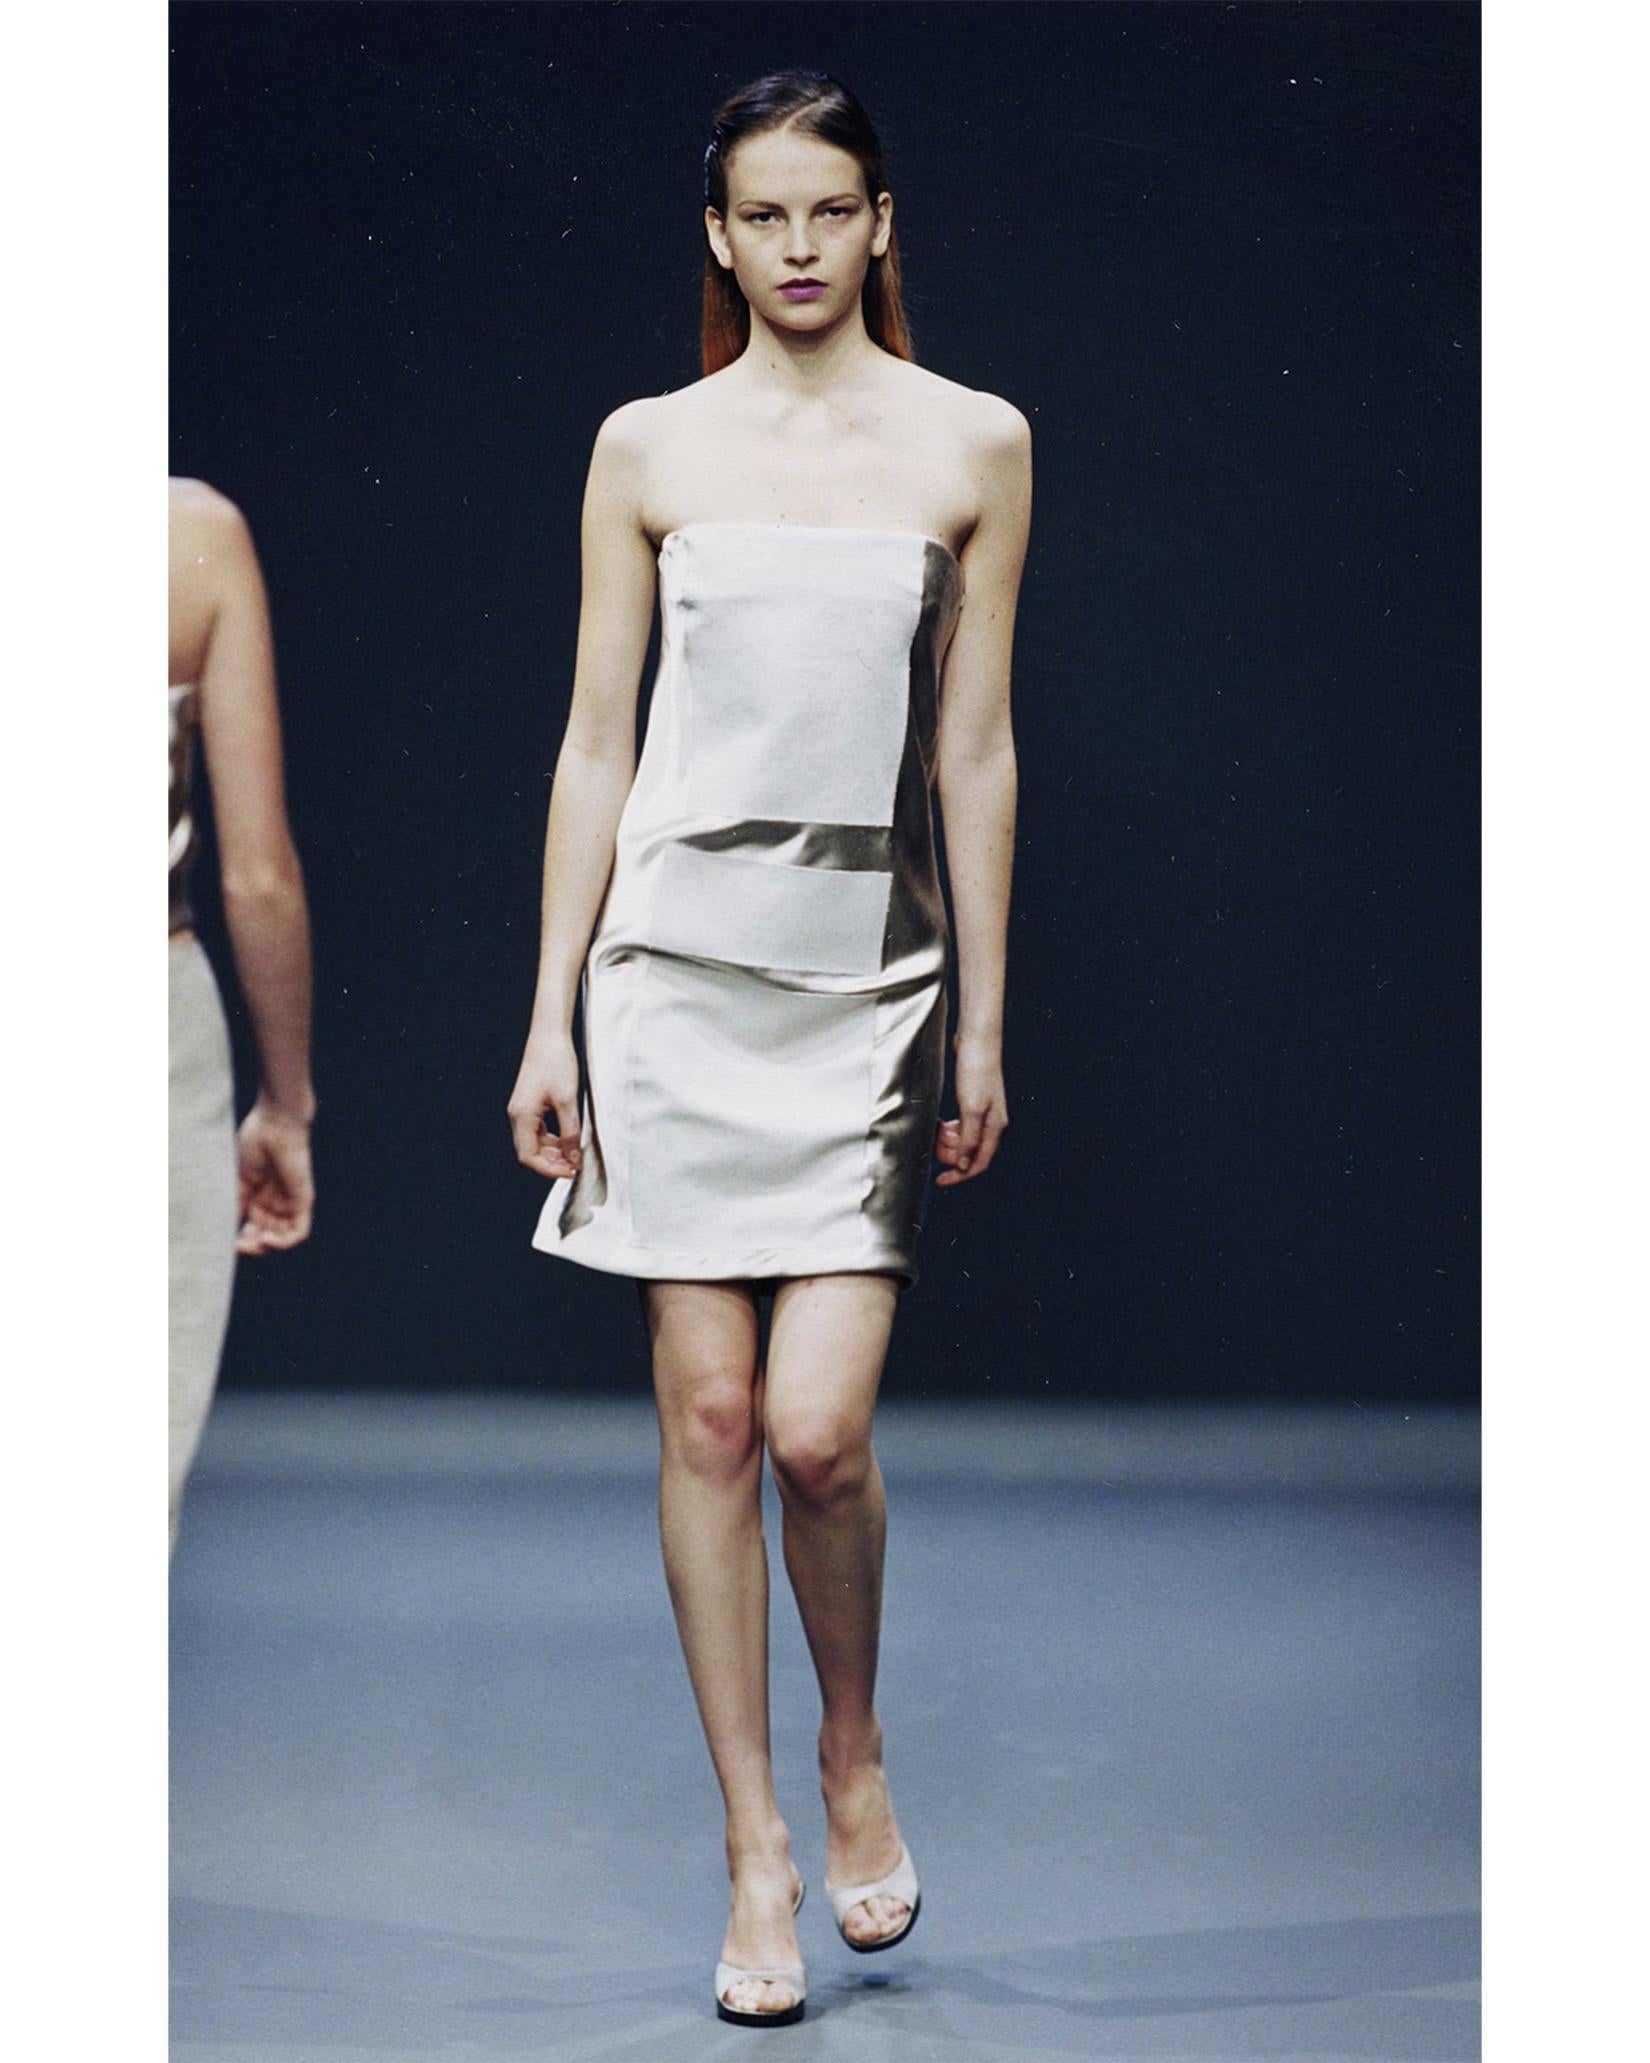 S/S 1998 Prada by Miuccia Prada nude silk satin strapless geometric block mini dress. Concealed side zip closure. Contrasting silk satin with matte, linen blend geometric block paneling at front and back. Fully lined corset upper with 100% Rayon